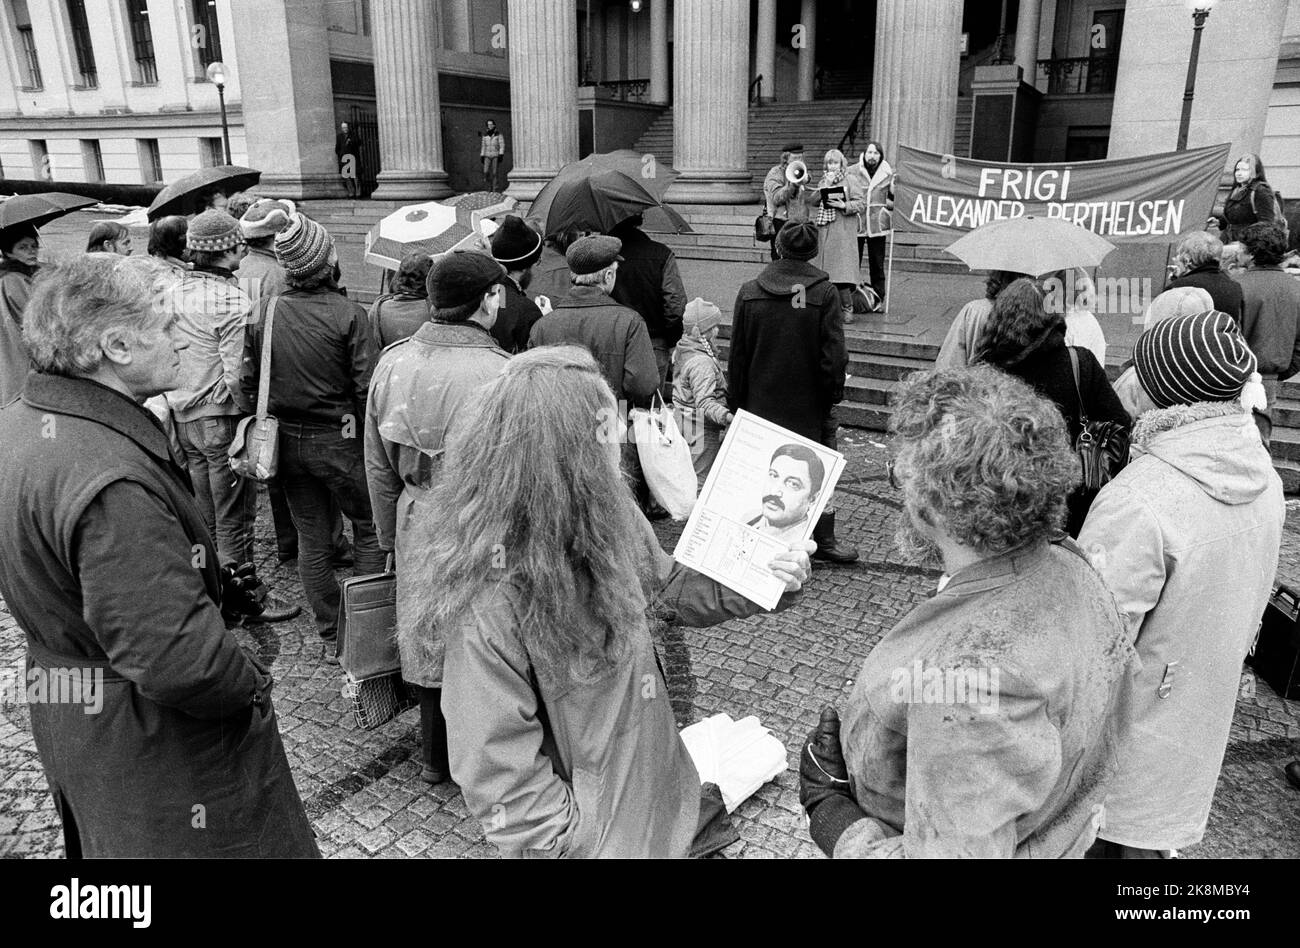 Oslo 1985-05: Berthelsen case. Demonstration in support of the Norwegian citizen and Kurder Alexander Bertelsen outside the University of May 1985. Berthelsen was indicted by the Turkish Court because he helped write a Norwegian school book on the Kurders situation in Turkey. He was sentenced to five years in prison and 20 months inner reference. After Norwegian pressure, Berthelsen was later expelled from Turkey and sat on the plane to Norway. Photo: Bjørn Sigurdsøn Stock Photo